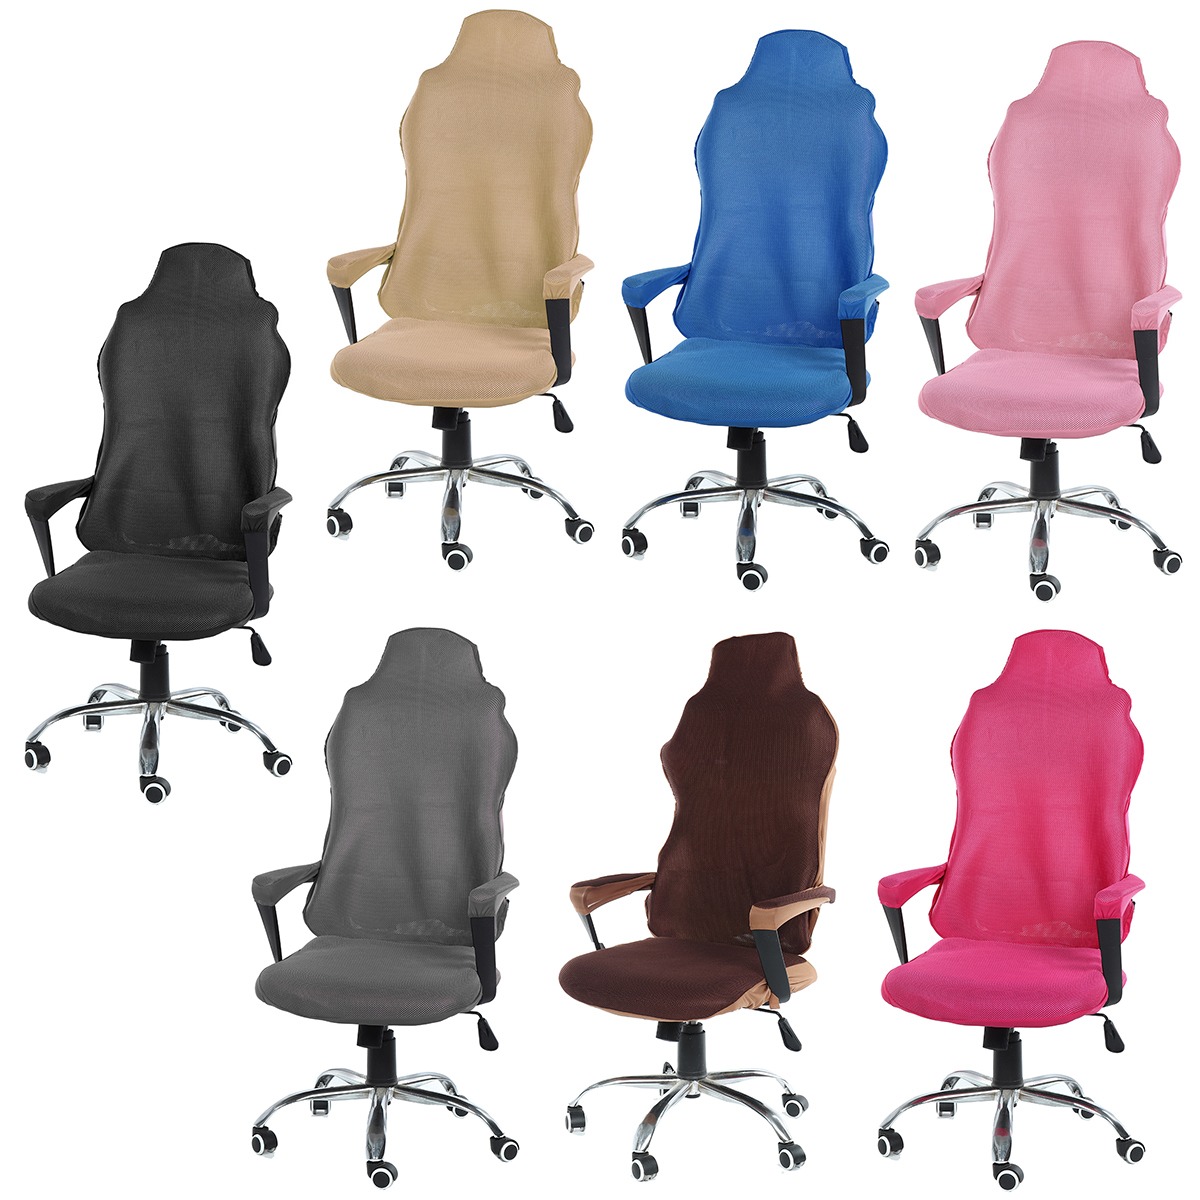 Mesh-Gaming-Chair-Elastic-Chair-Cover-Office-Chair-Dustproof-Chair-Cover-Home-Office-Solid-Color-Cha-1827333-1